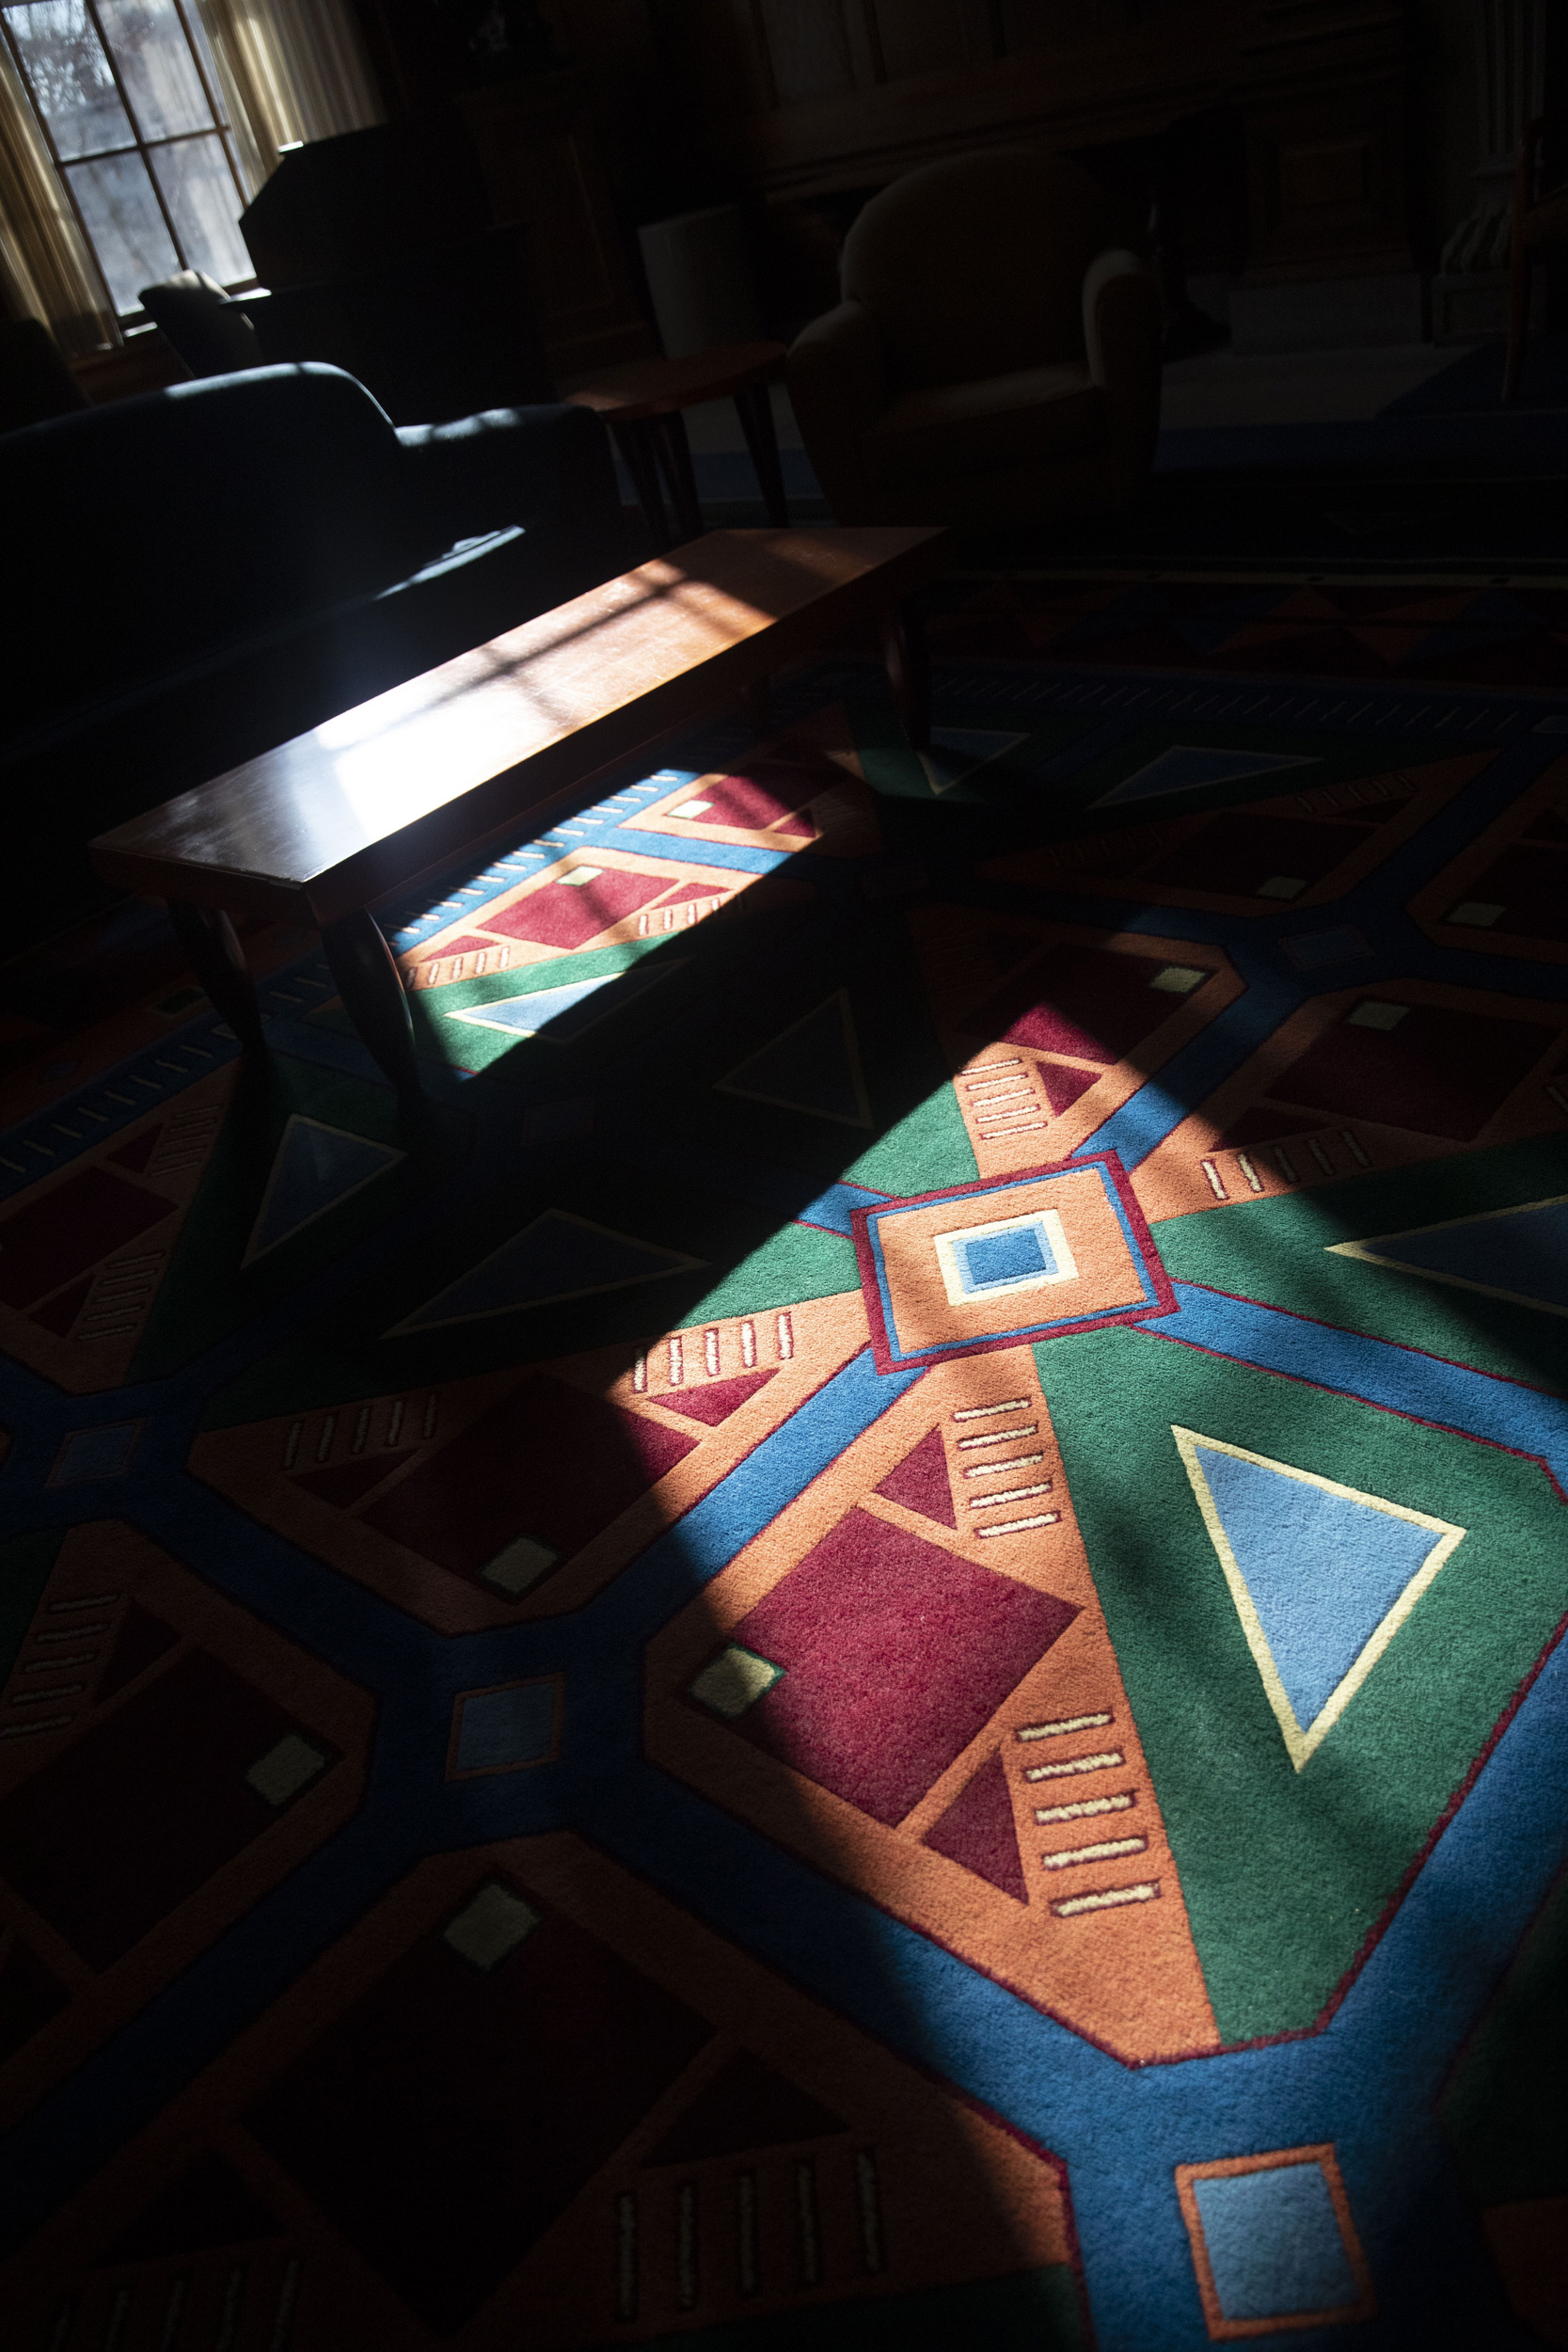 Thompson room rugs have a colorful abstract pattern in the Barker Center.